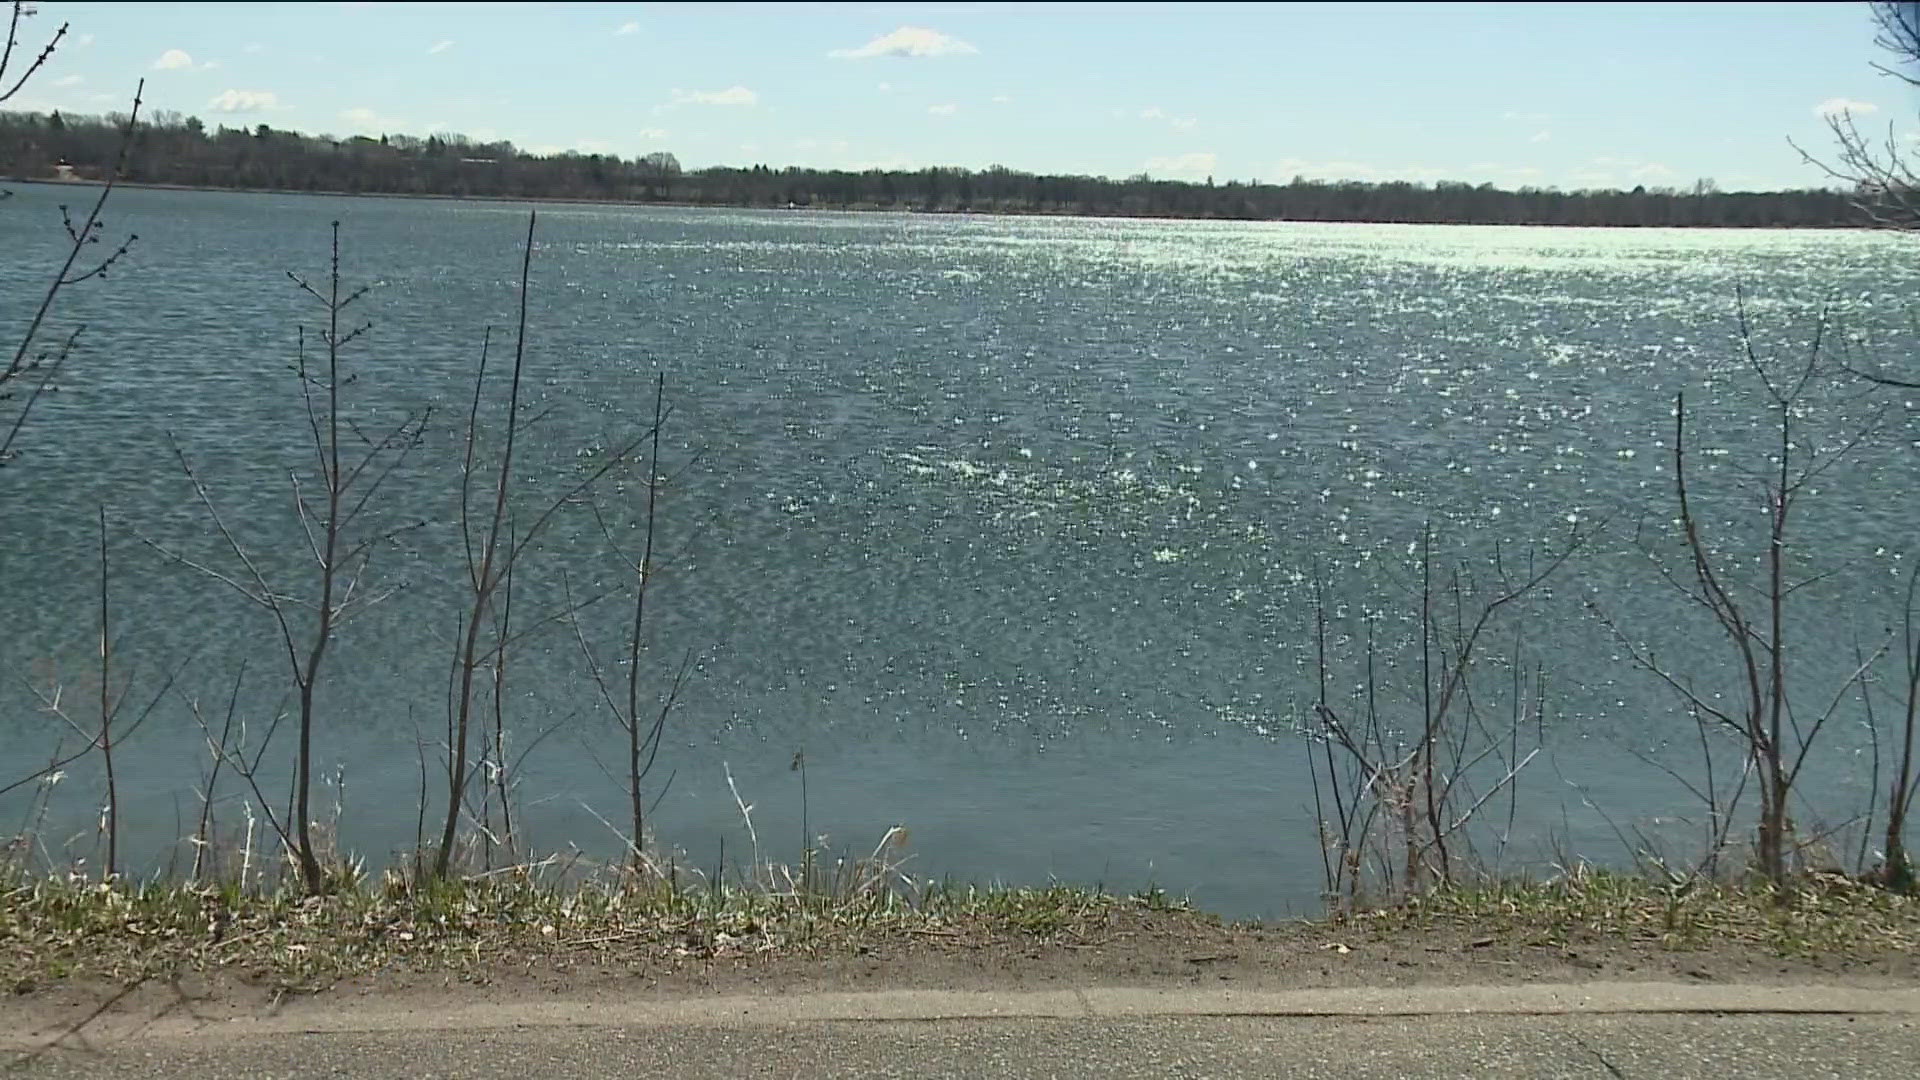 The record-setting warmth over the winter could have an impact on lakes throughout the state.